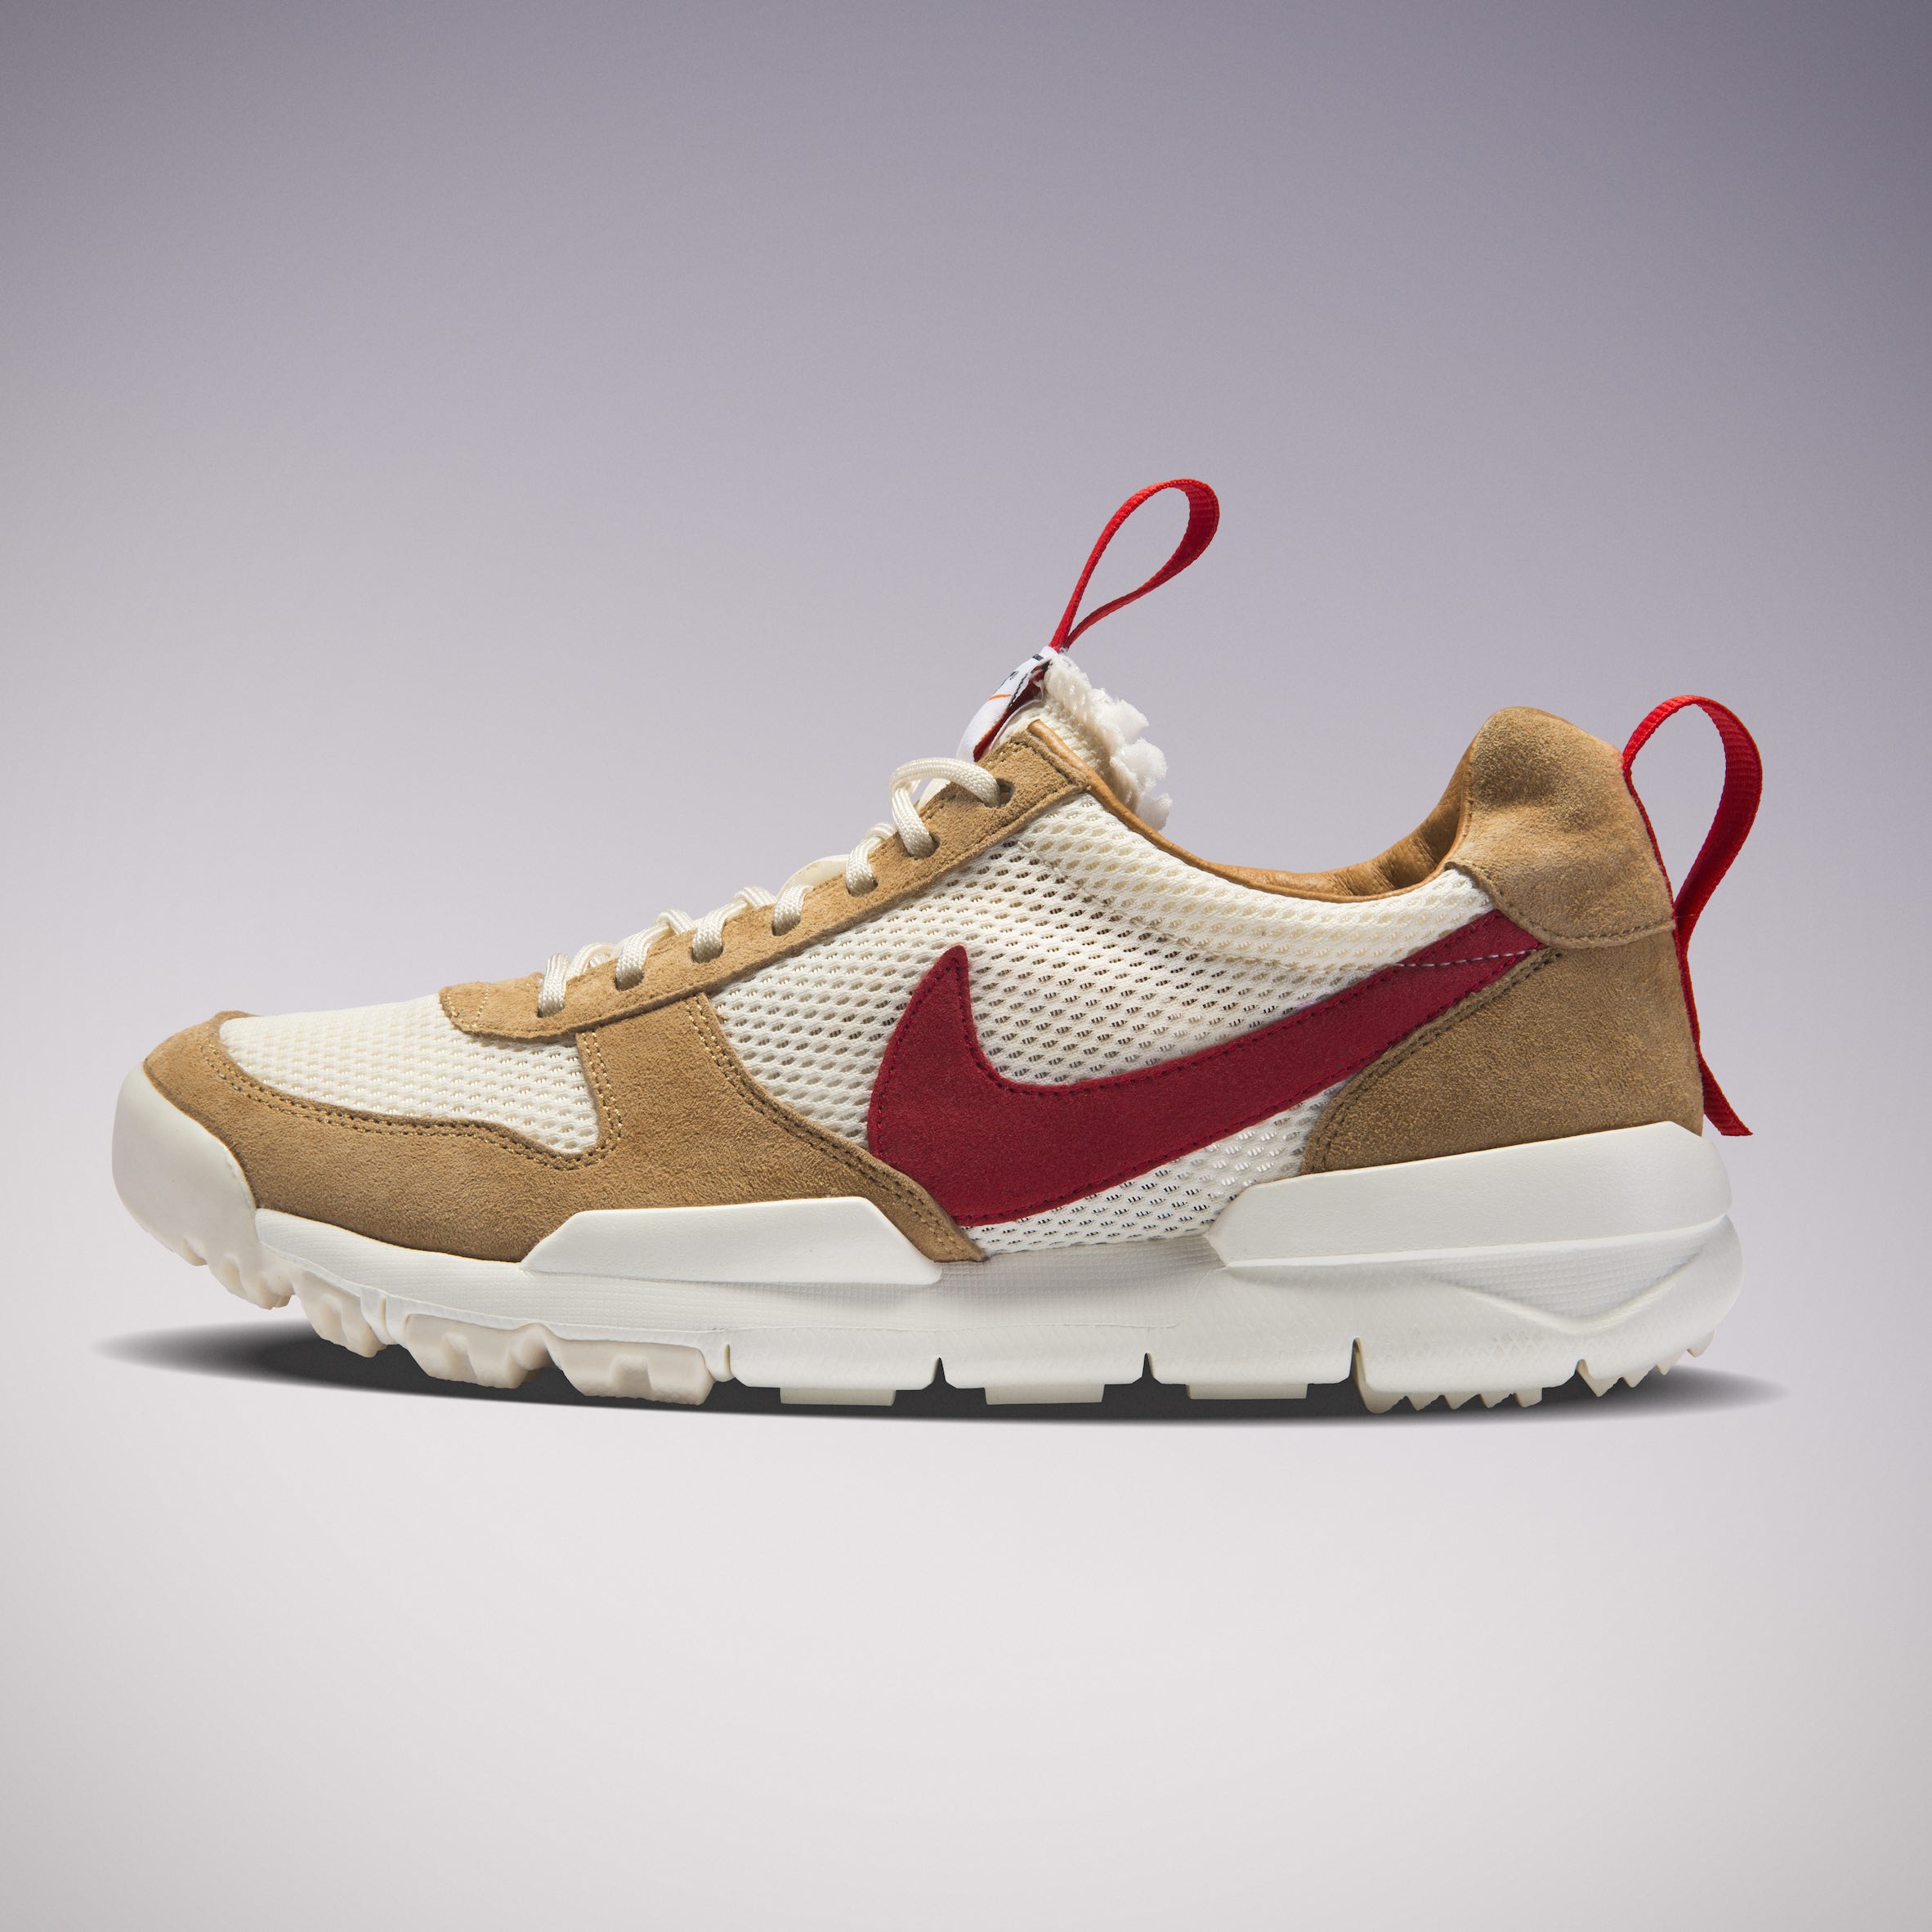 baloncesto medida Escalofriante Tom Sachs releases second edition of Mars Yard sneakers for Nike